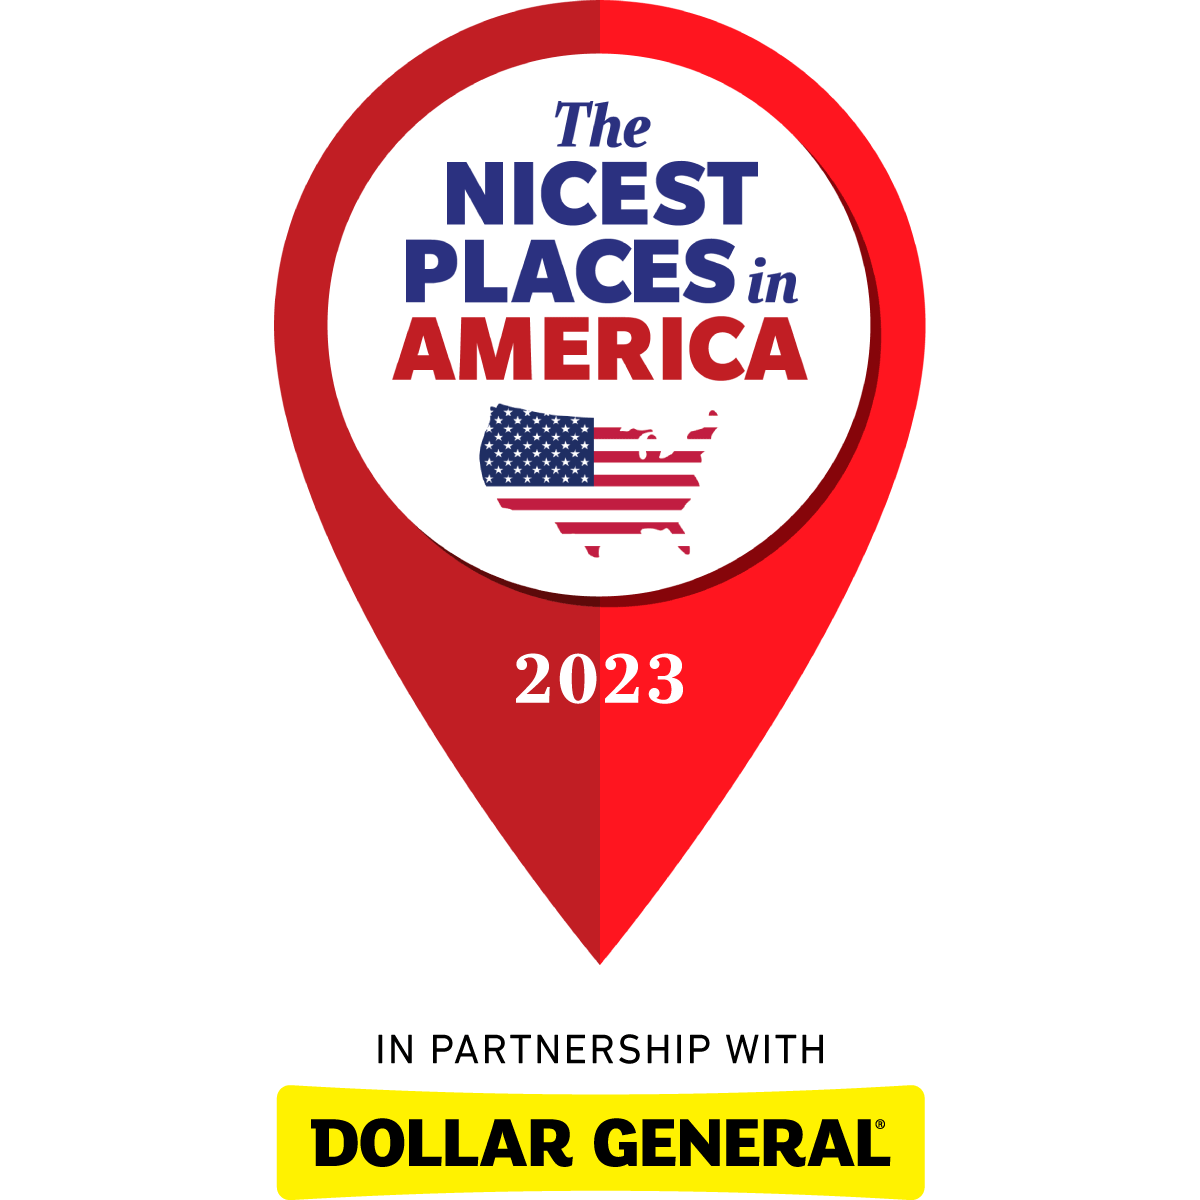 The Nicest Places in America 2023